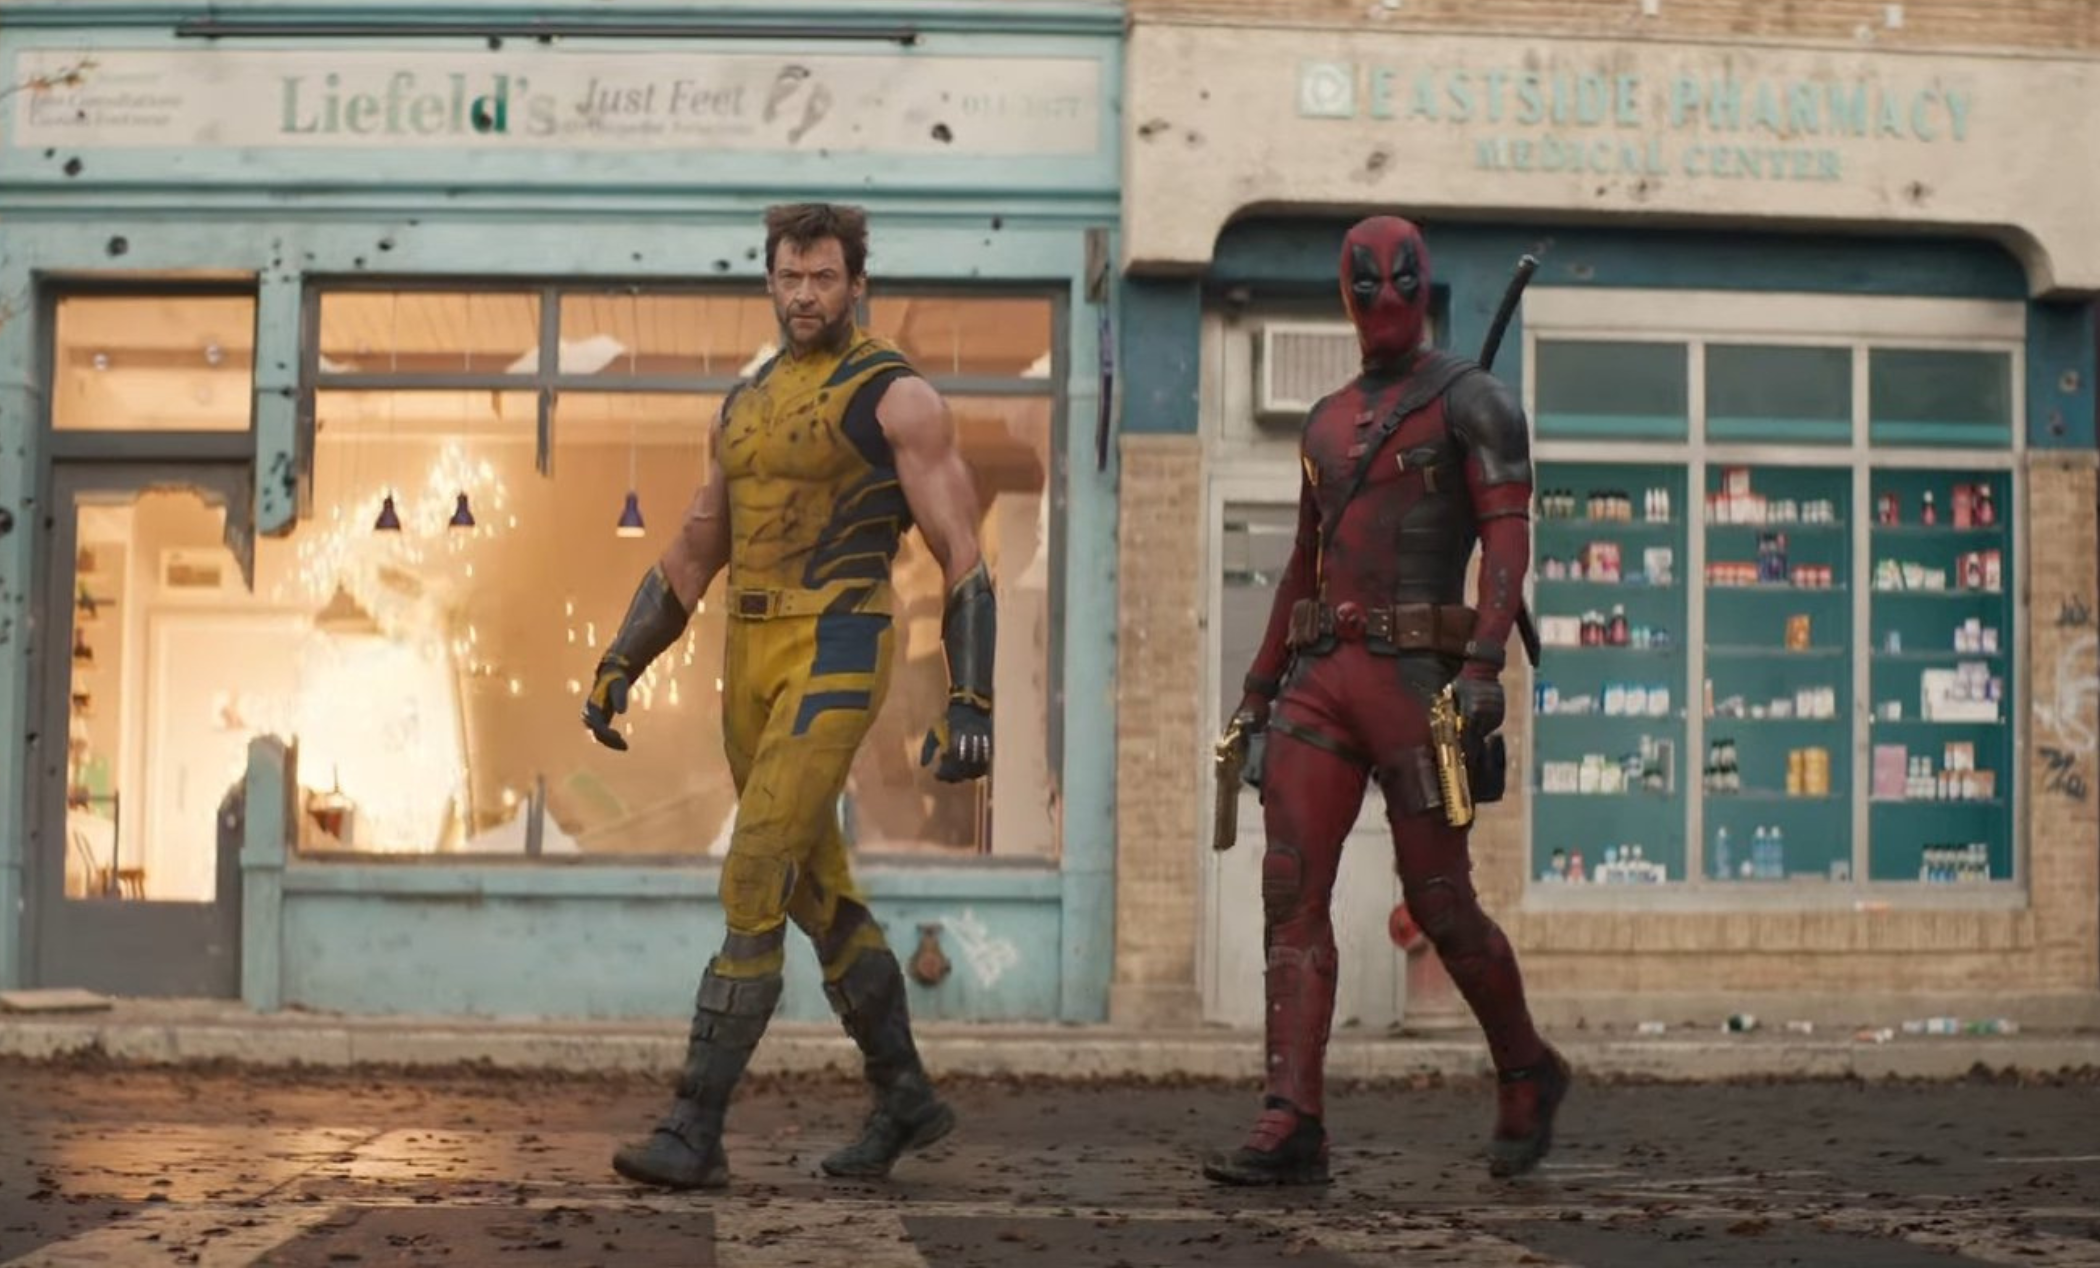 Ryan Reynolds is ‘proud’ of Disney’s decision to make ‘Deadpool & Wolverine’ an R-rated movie